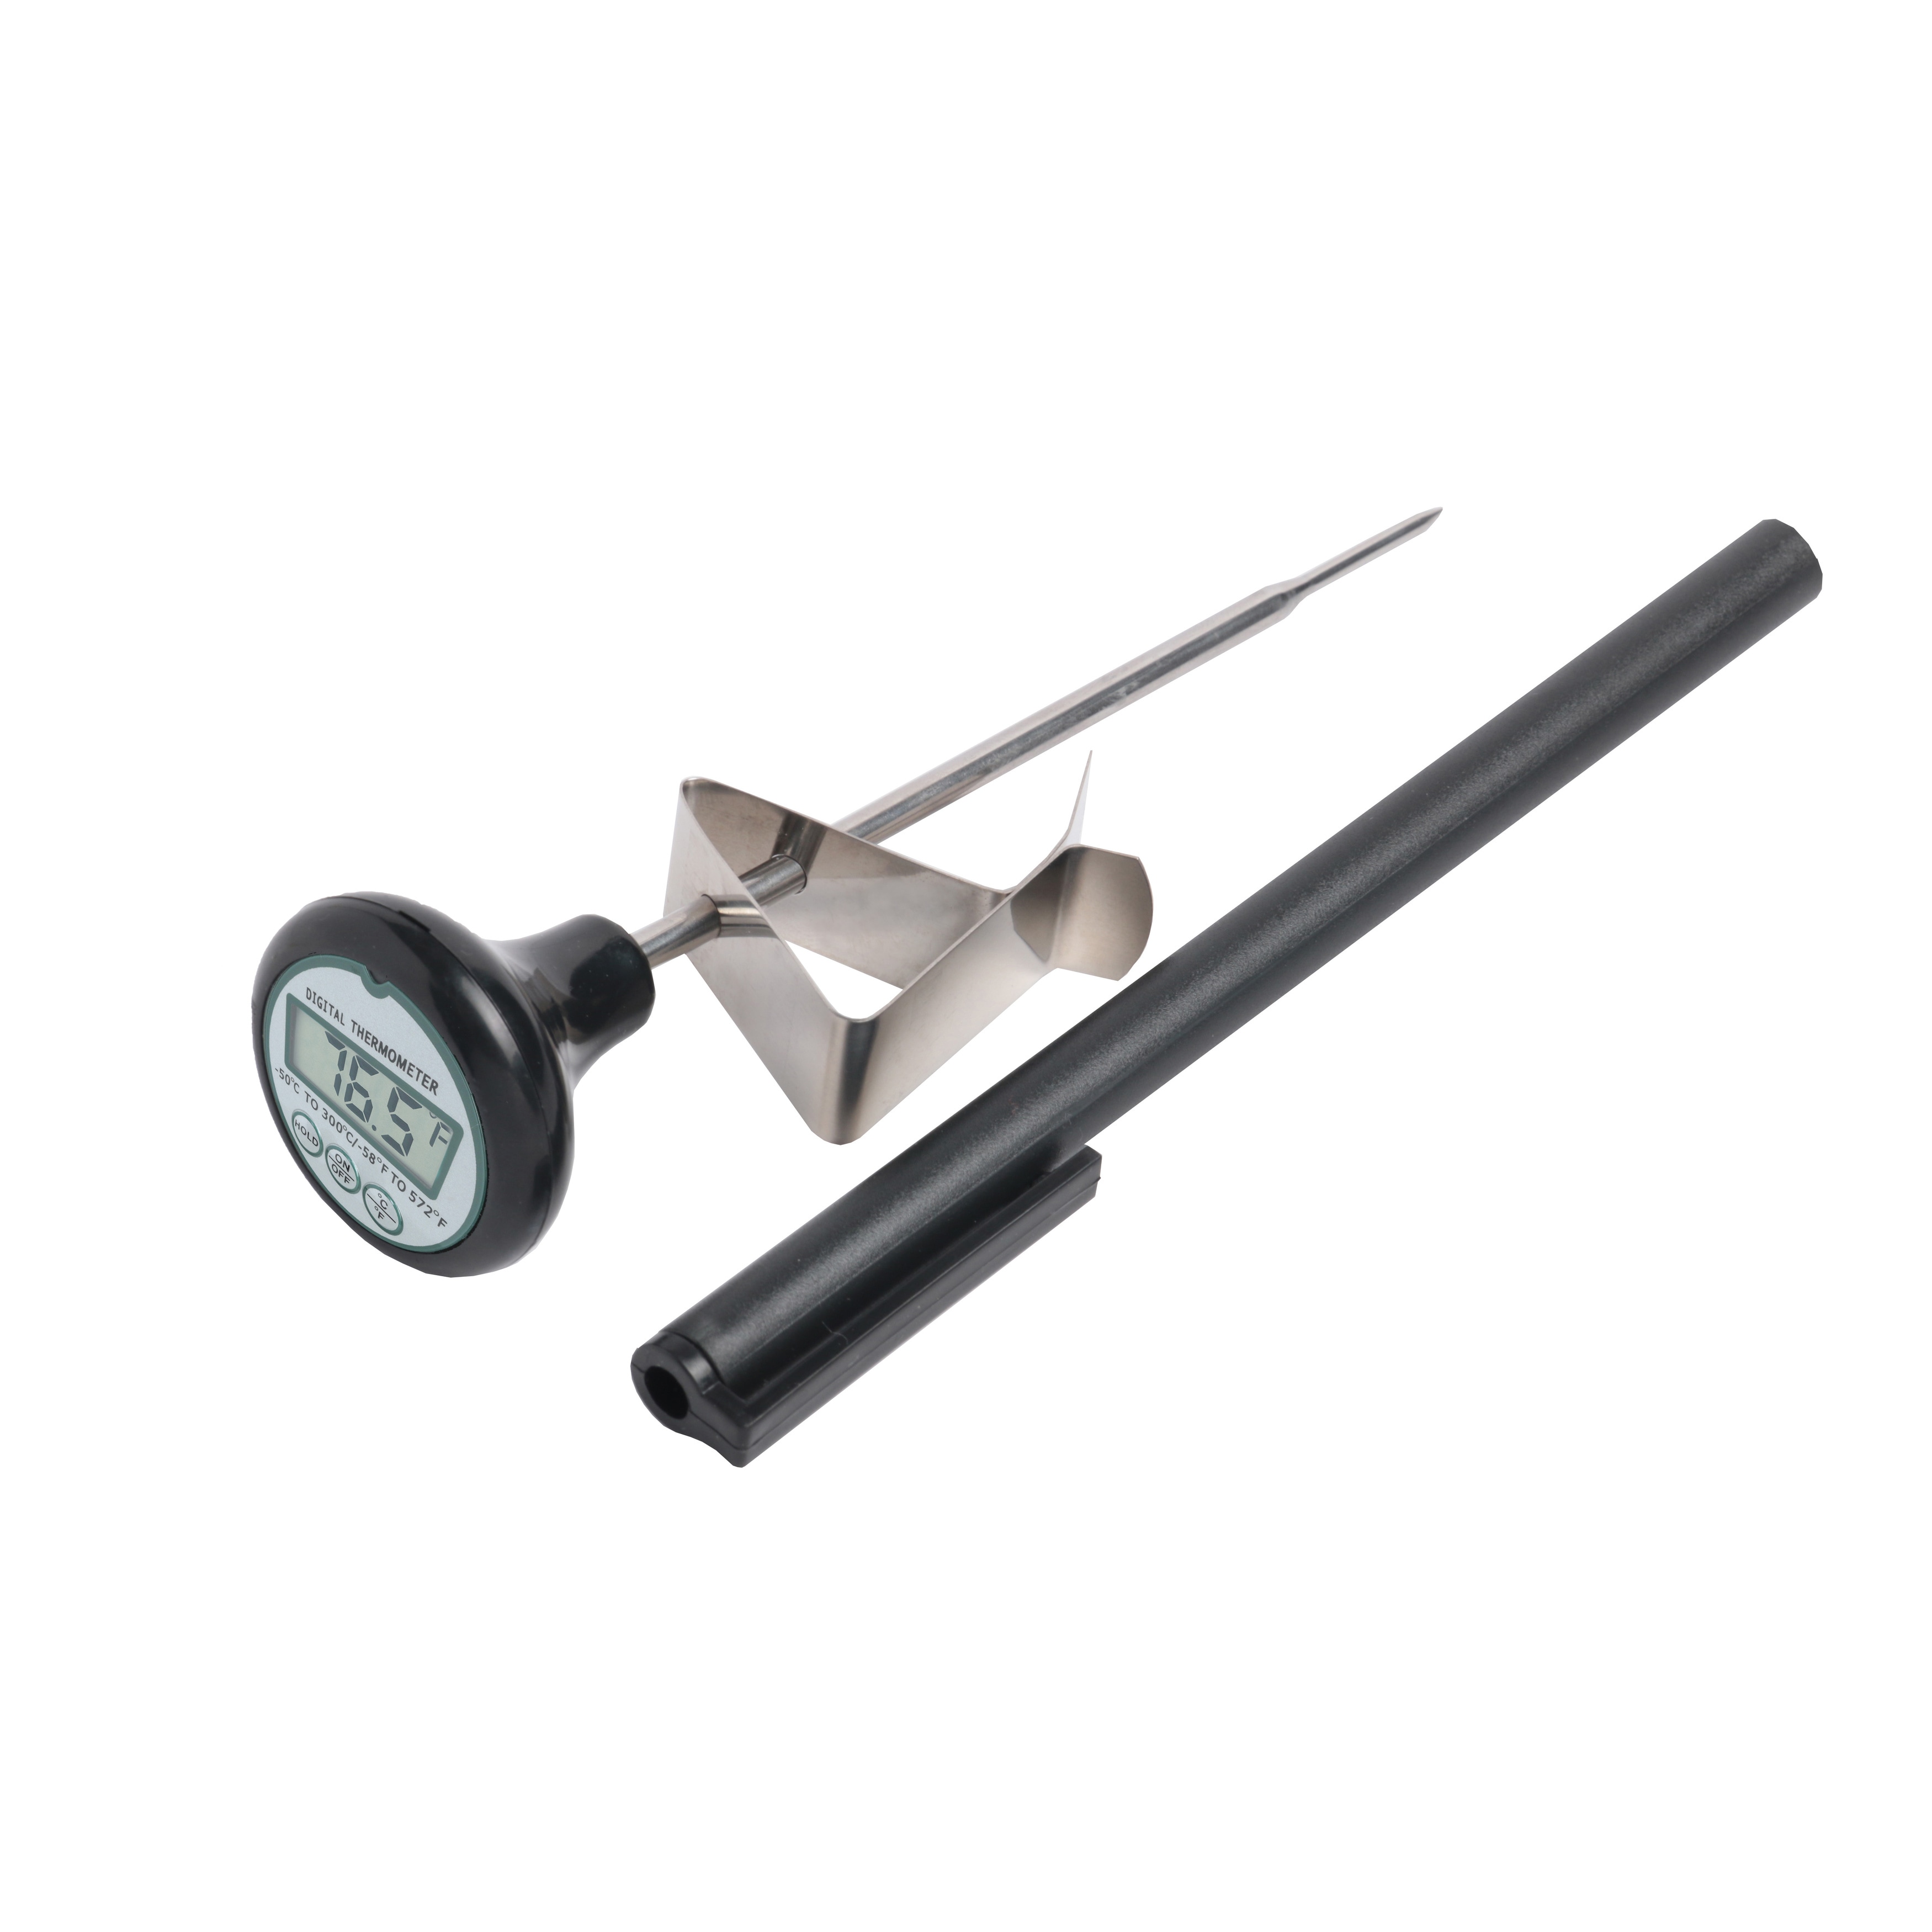 Digital Cooking Thermometer with Stainless steel Probe and Pot